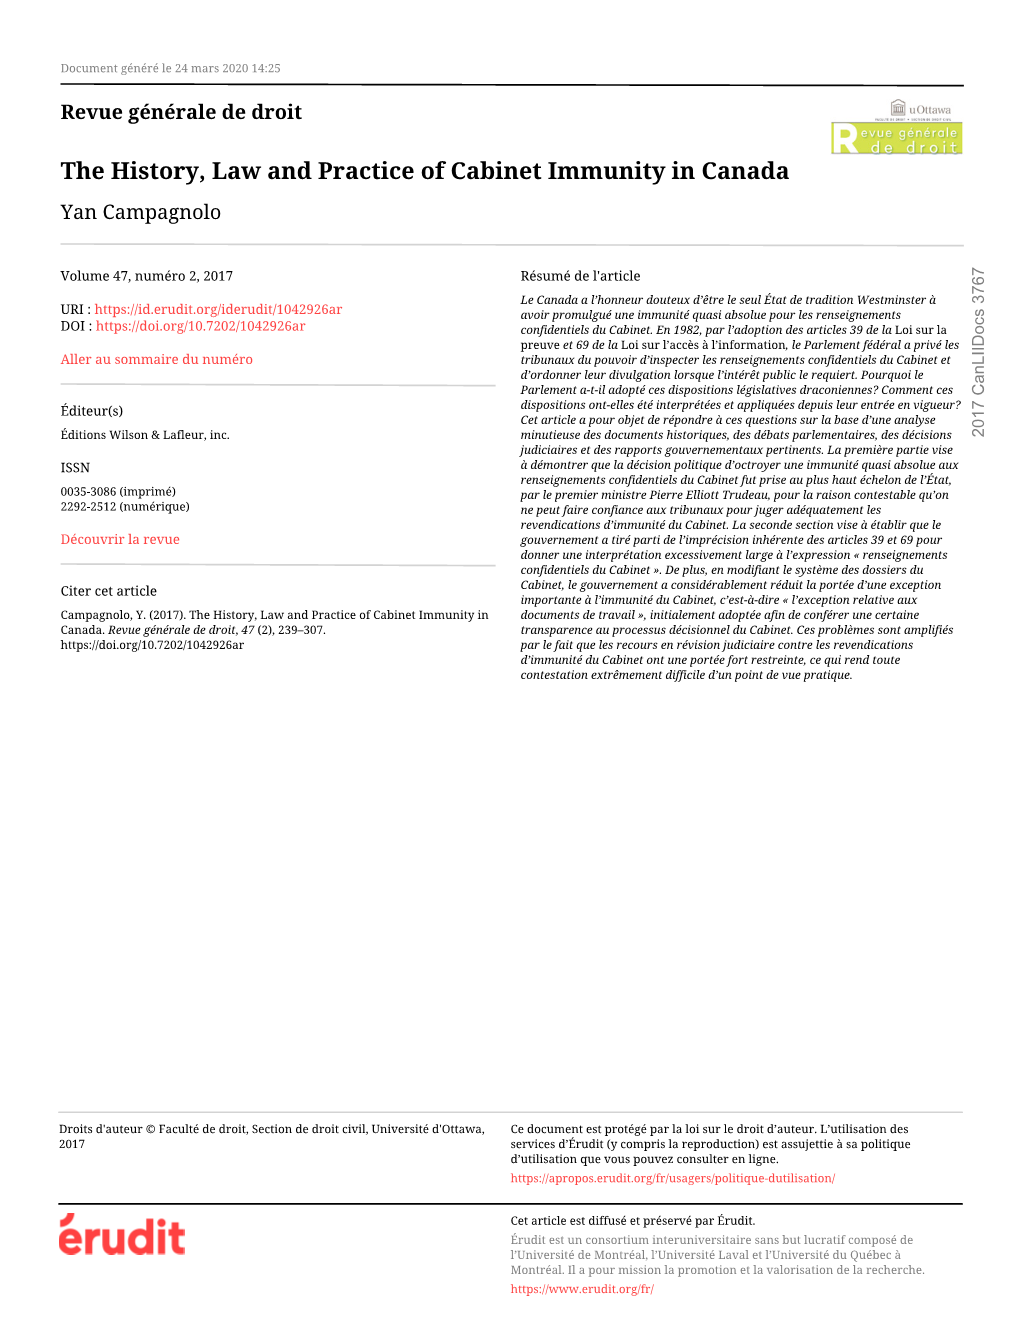 The History, Law and Practice of Cabinet Immunity in Canada Yan Campagnolo